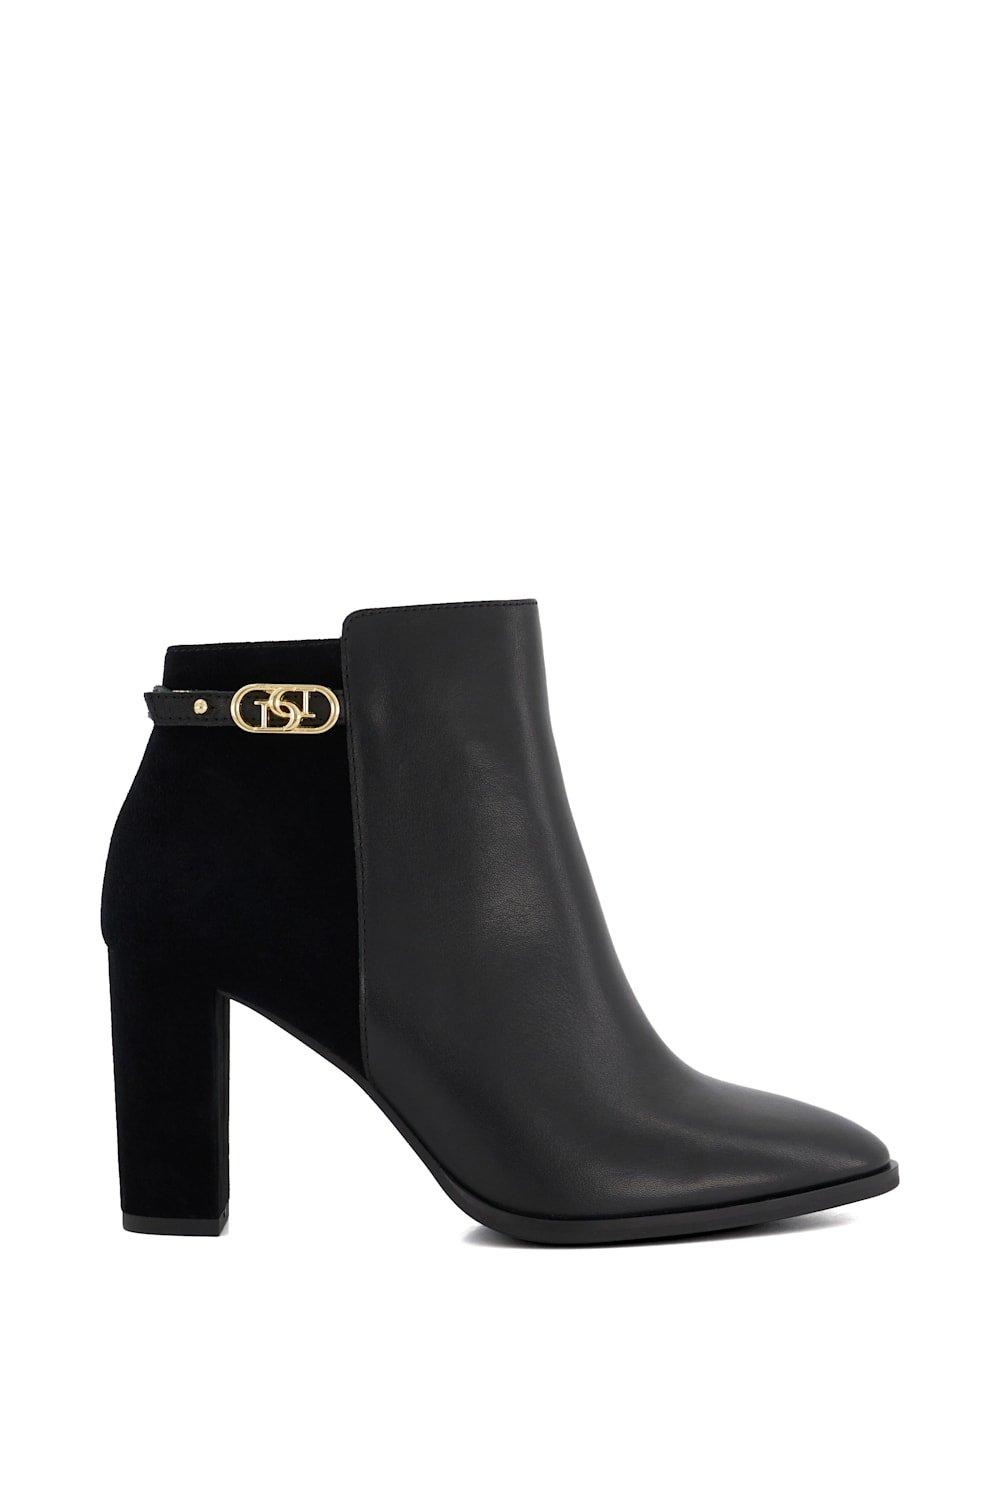 Boots | 'Olia' Leather Ankle Boots | Dune London